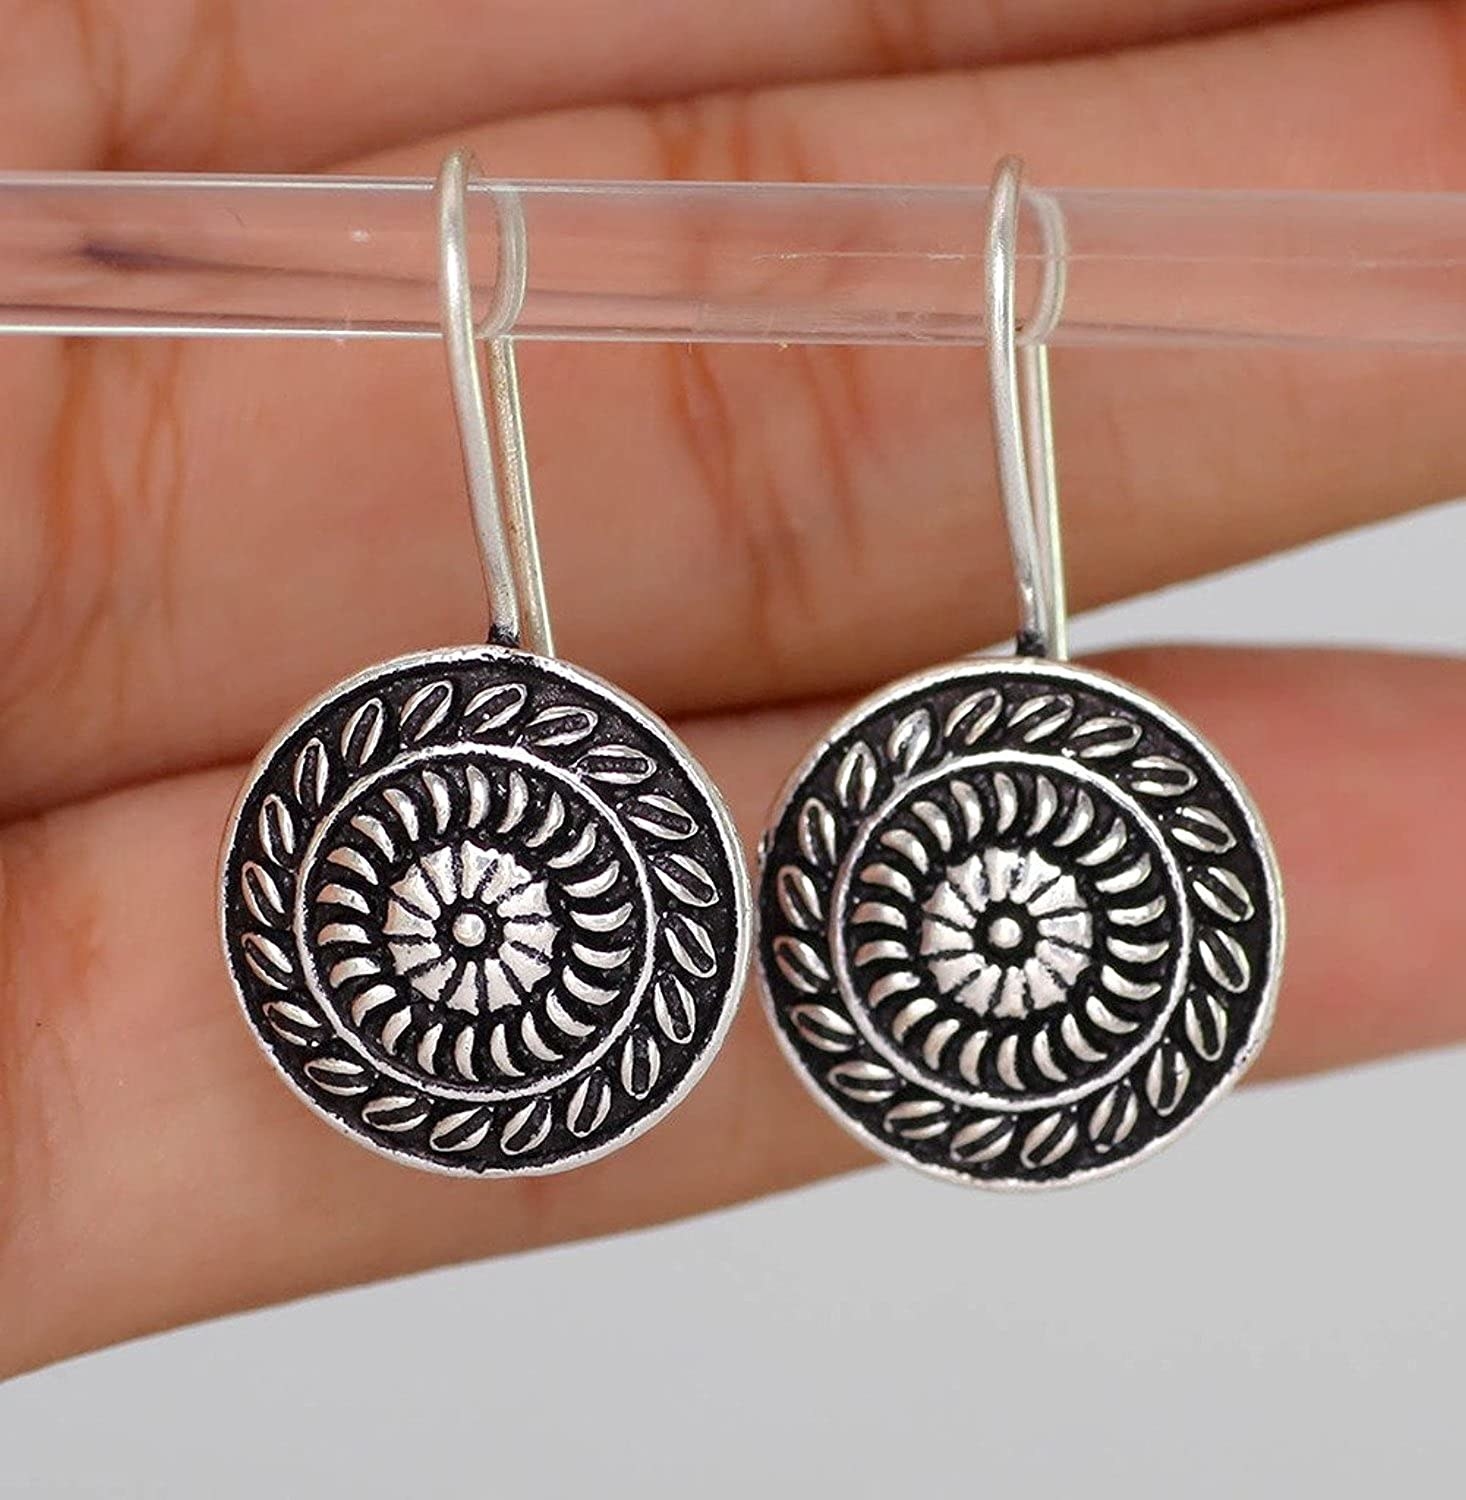 The earrings are made of oxidised silver. They are circular in shape and have spiral designs on them.